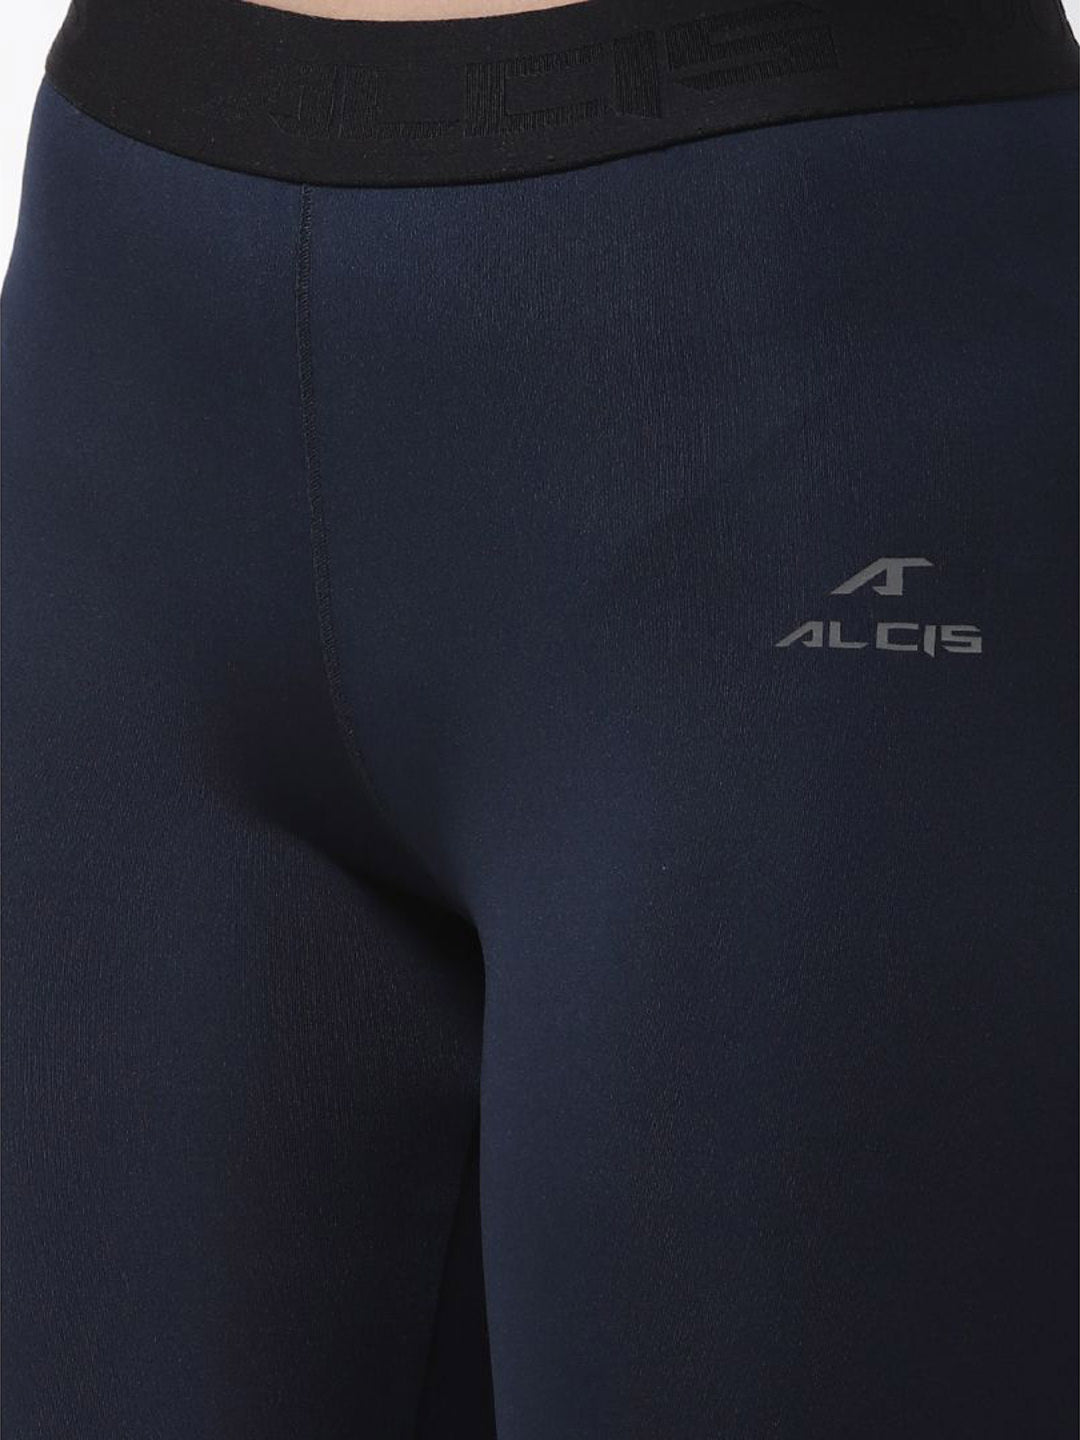 Alcis Women Navy Blue Solid Compression Training Tights